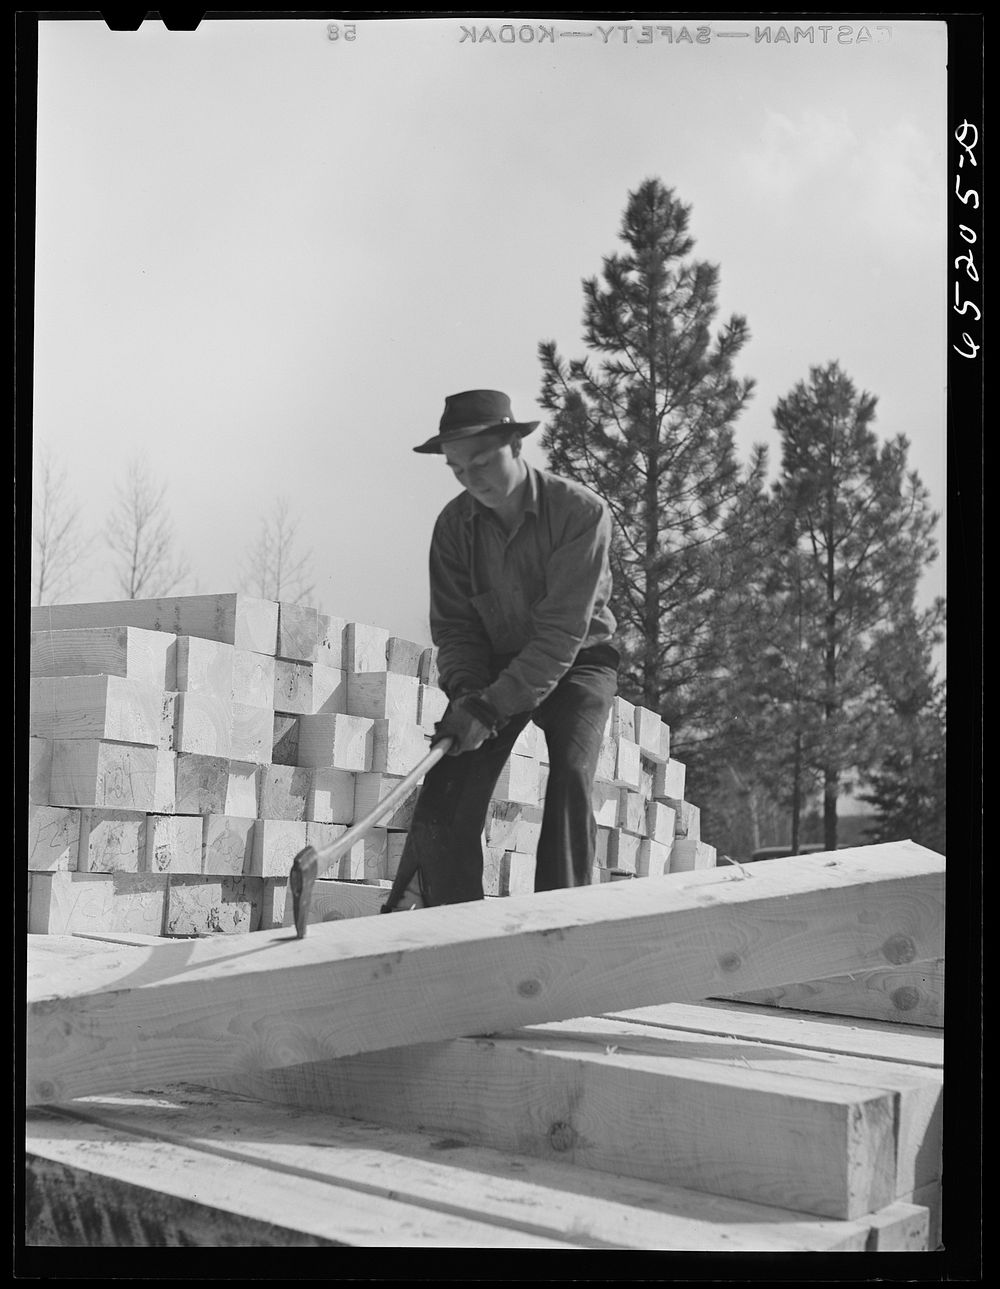 [Untitled photo, possibly related to: Kalispell, Montana. Flathead Valley special area project. Stacking railroad ties at…